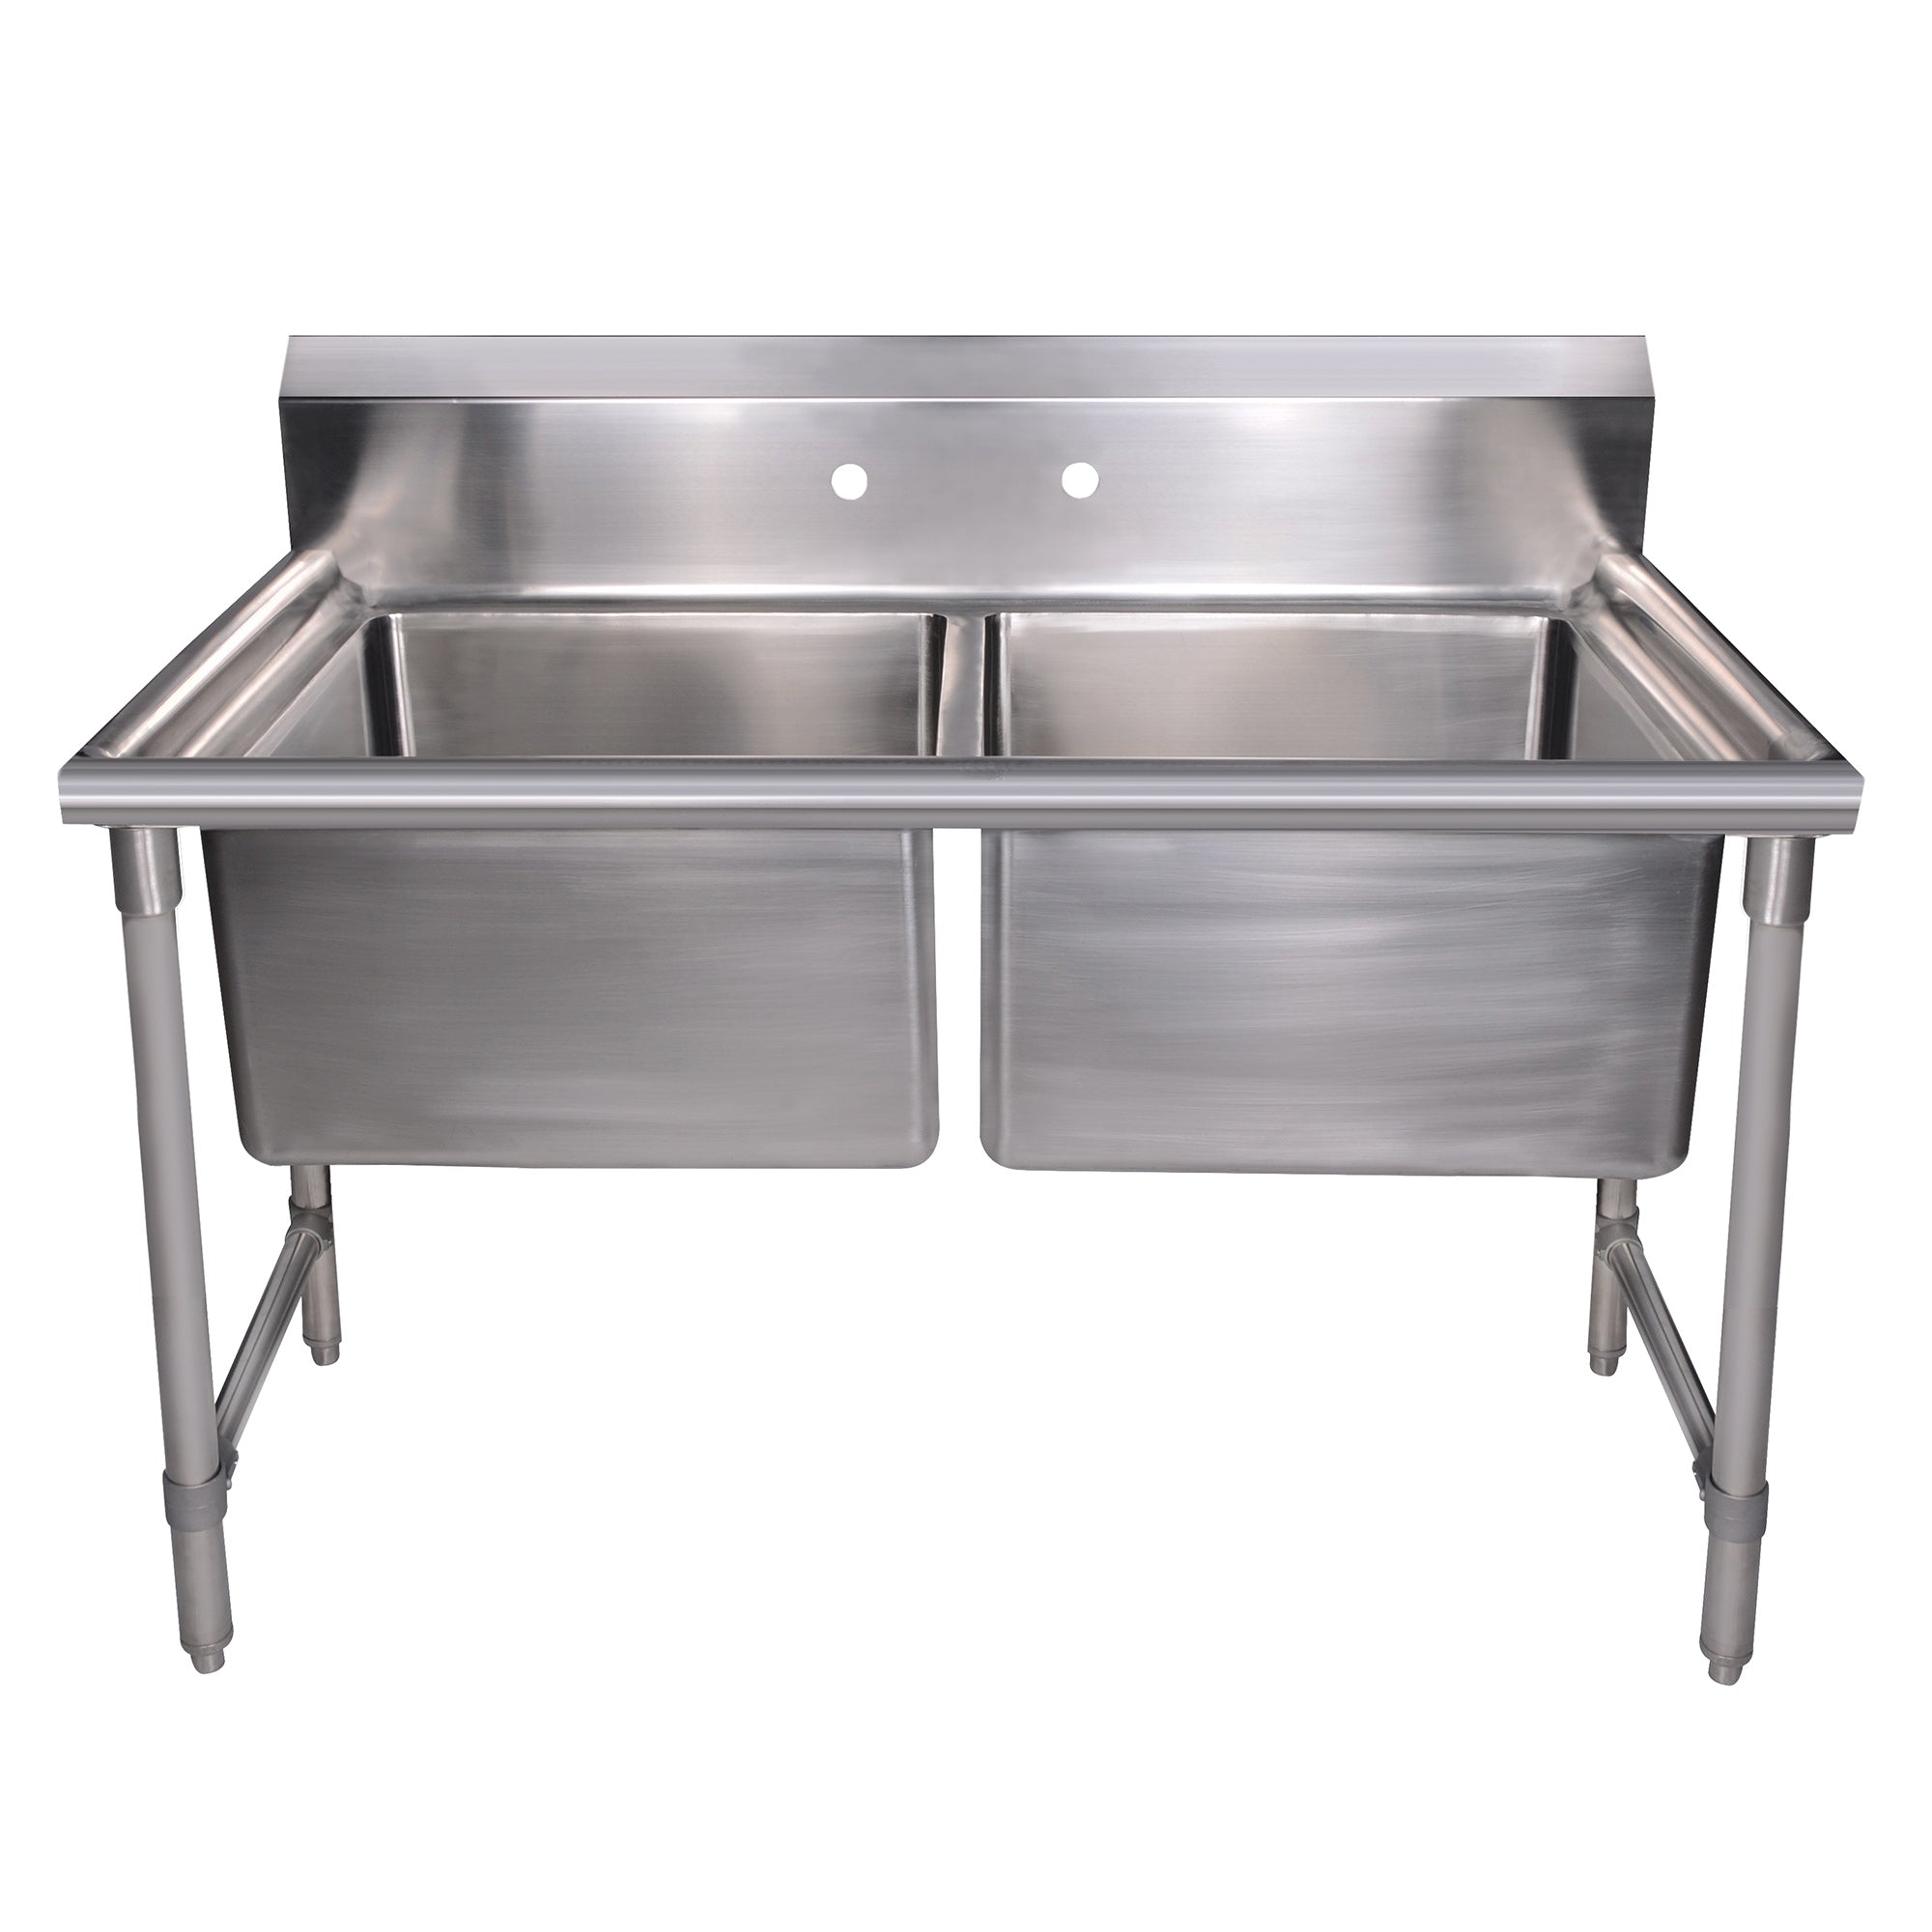 Double Bowl Large Laundry Tub: Freestanding Rectangular Design in Stainless Steel with Included Basket Strainers